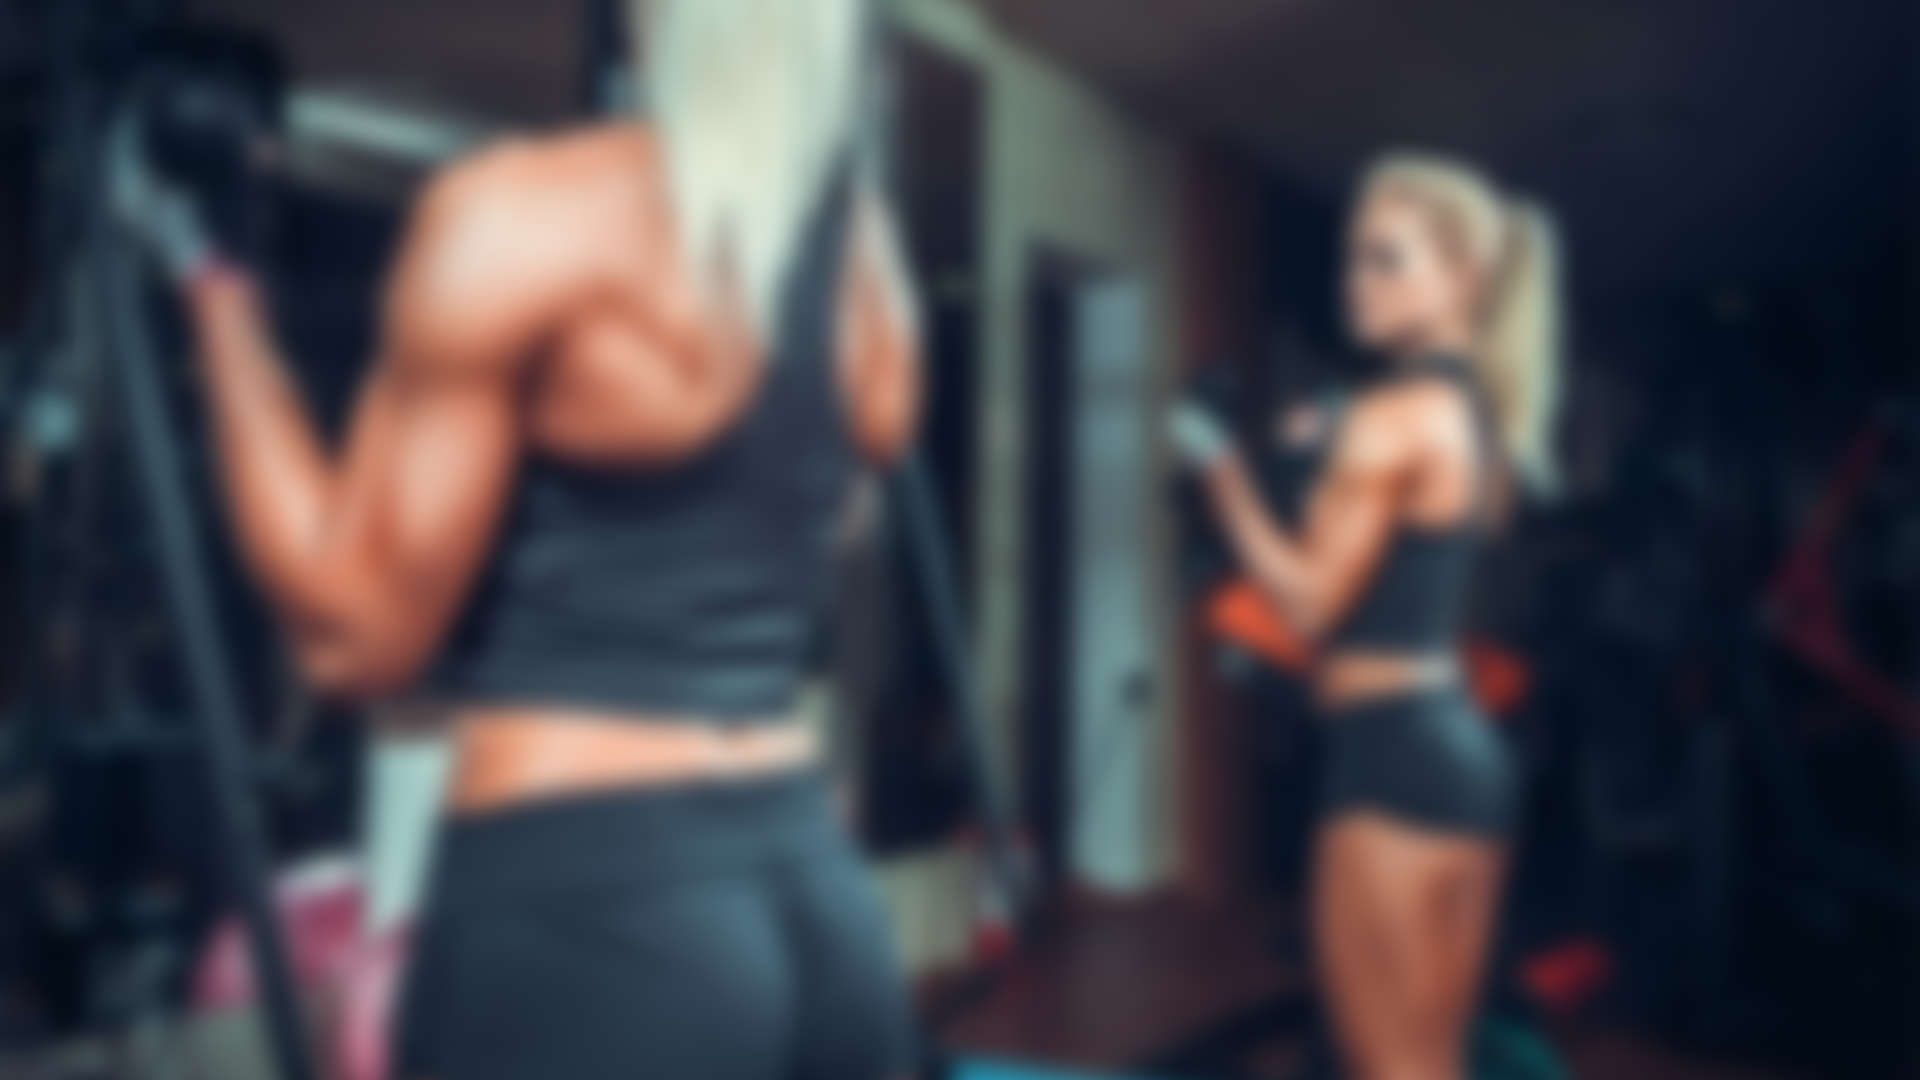 So, you want to be a Personal Trainer?